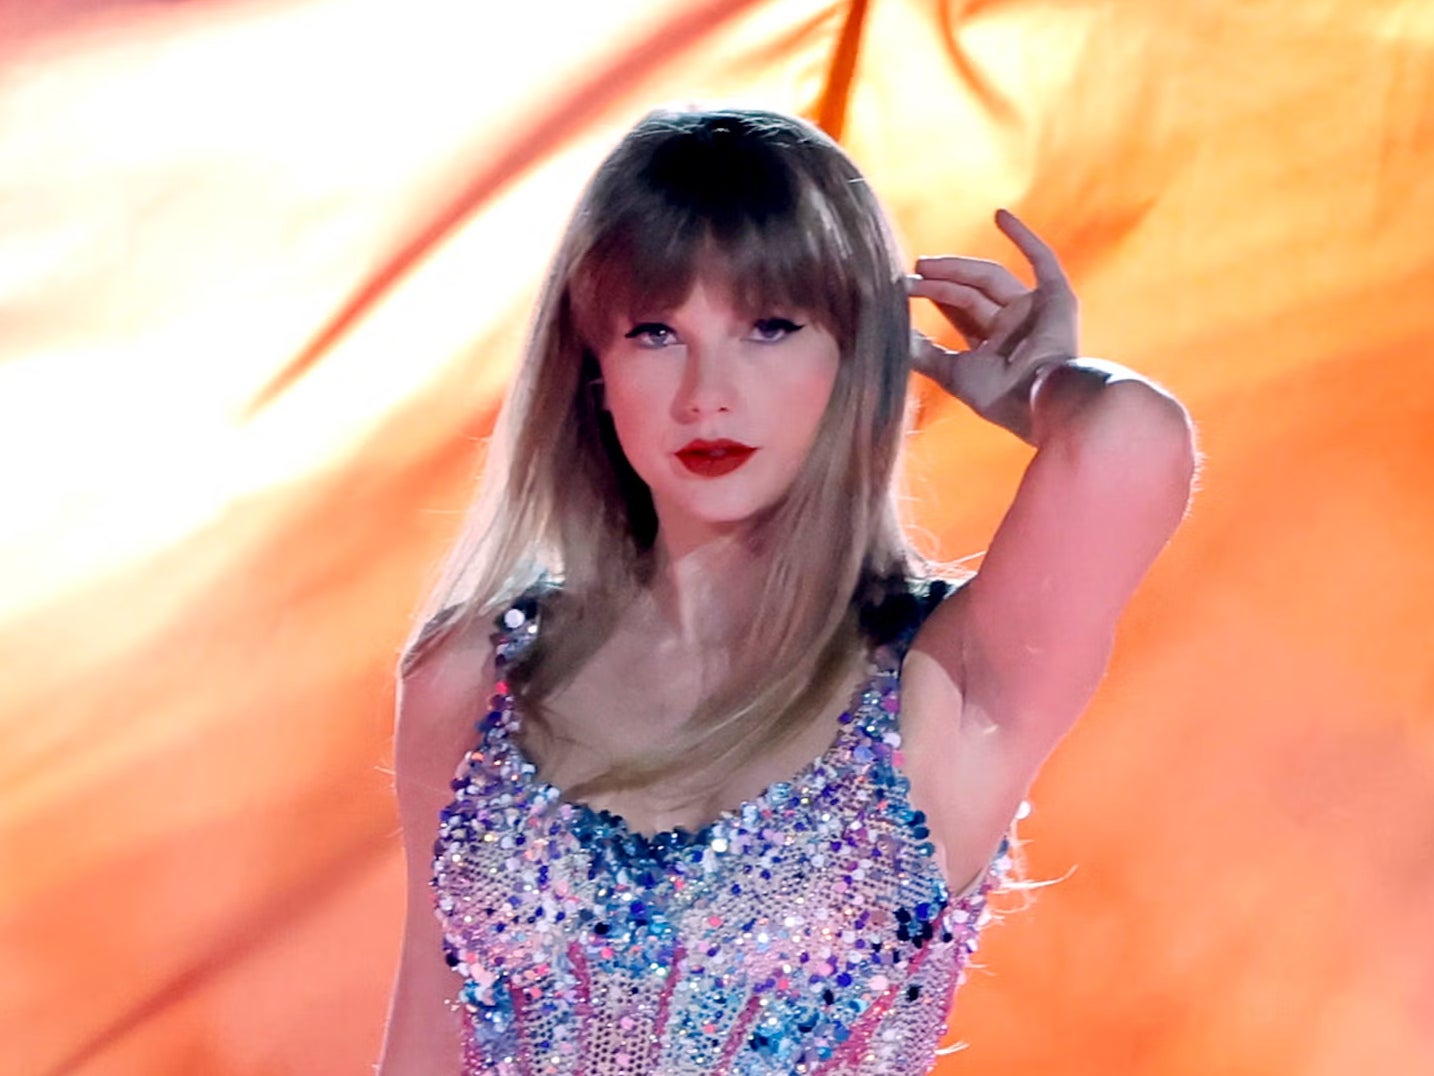 Cool summer: Taylor Swift is uniting fans with her triumphant Eras Tour